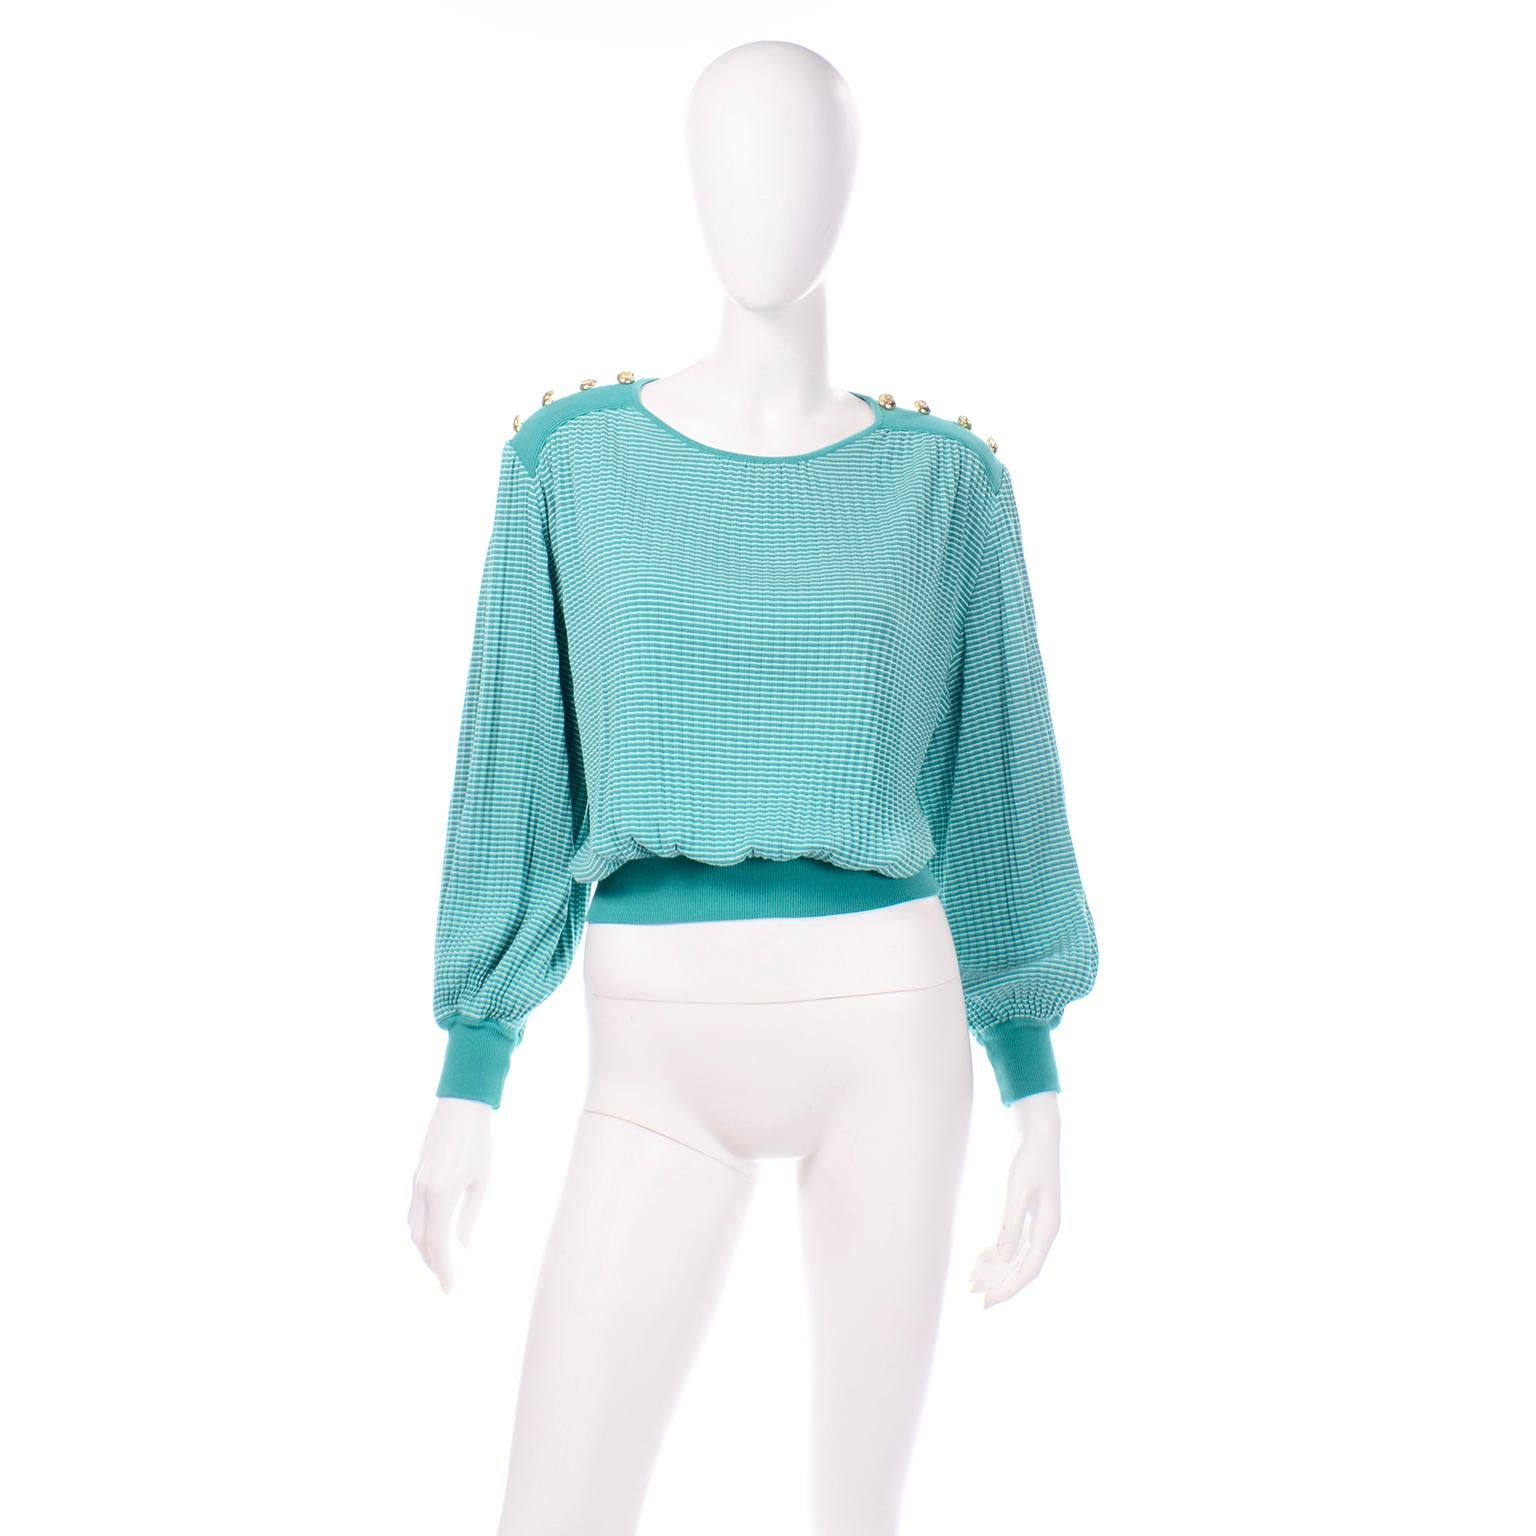 This is a vintage green long sleeve knit top from Valentino Studio in green and white stripes with gold tone engraved buttons along the shoulders. This oversized cotton blend knit sweater top has a micro pleated detail throughout with a ribbed